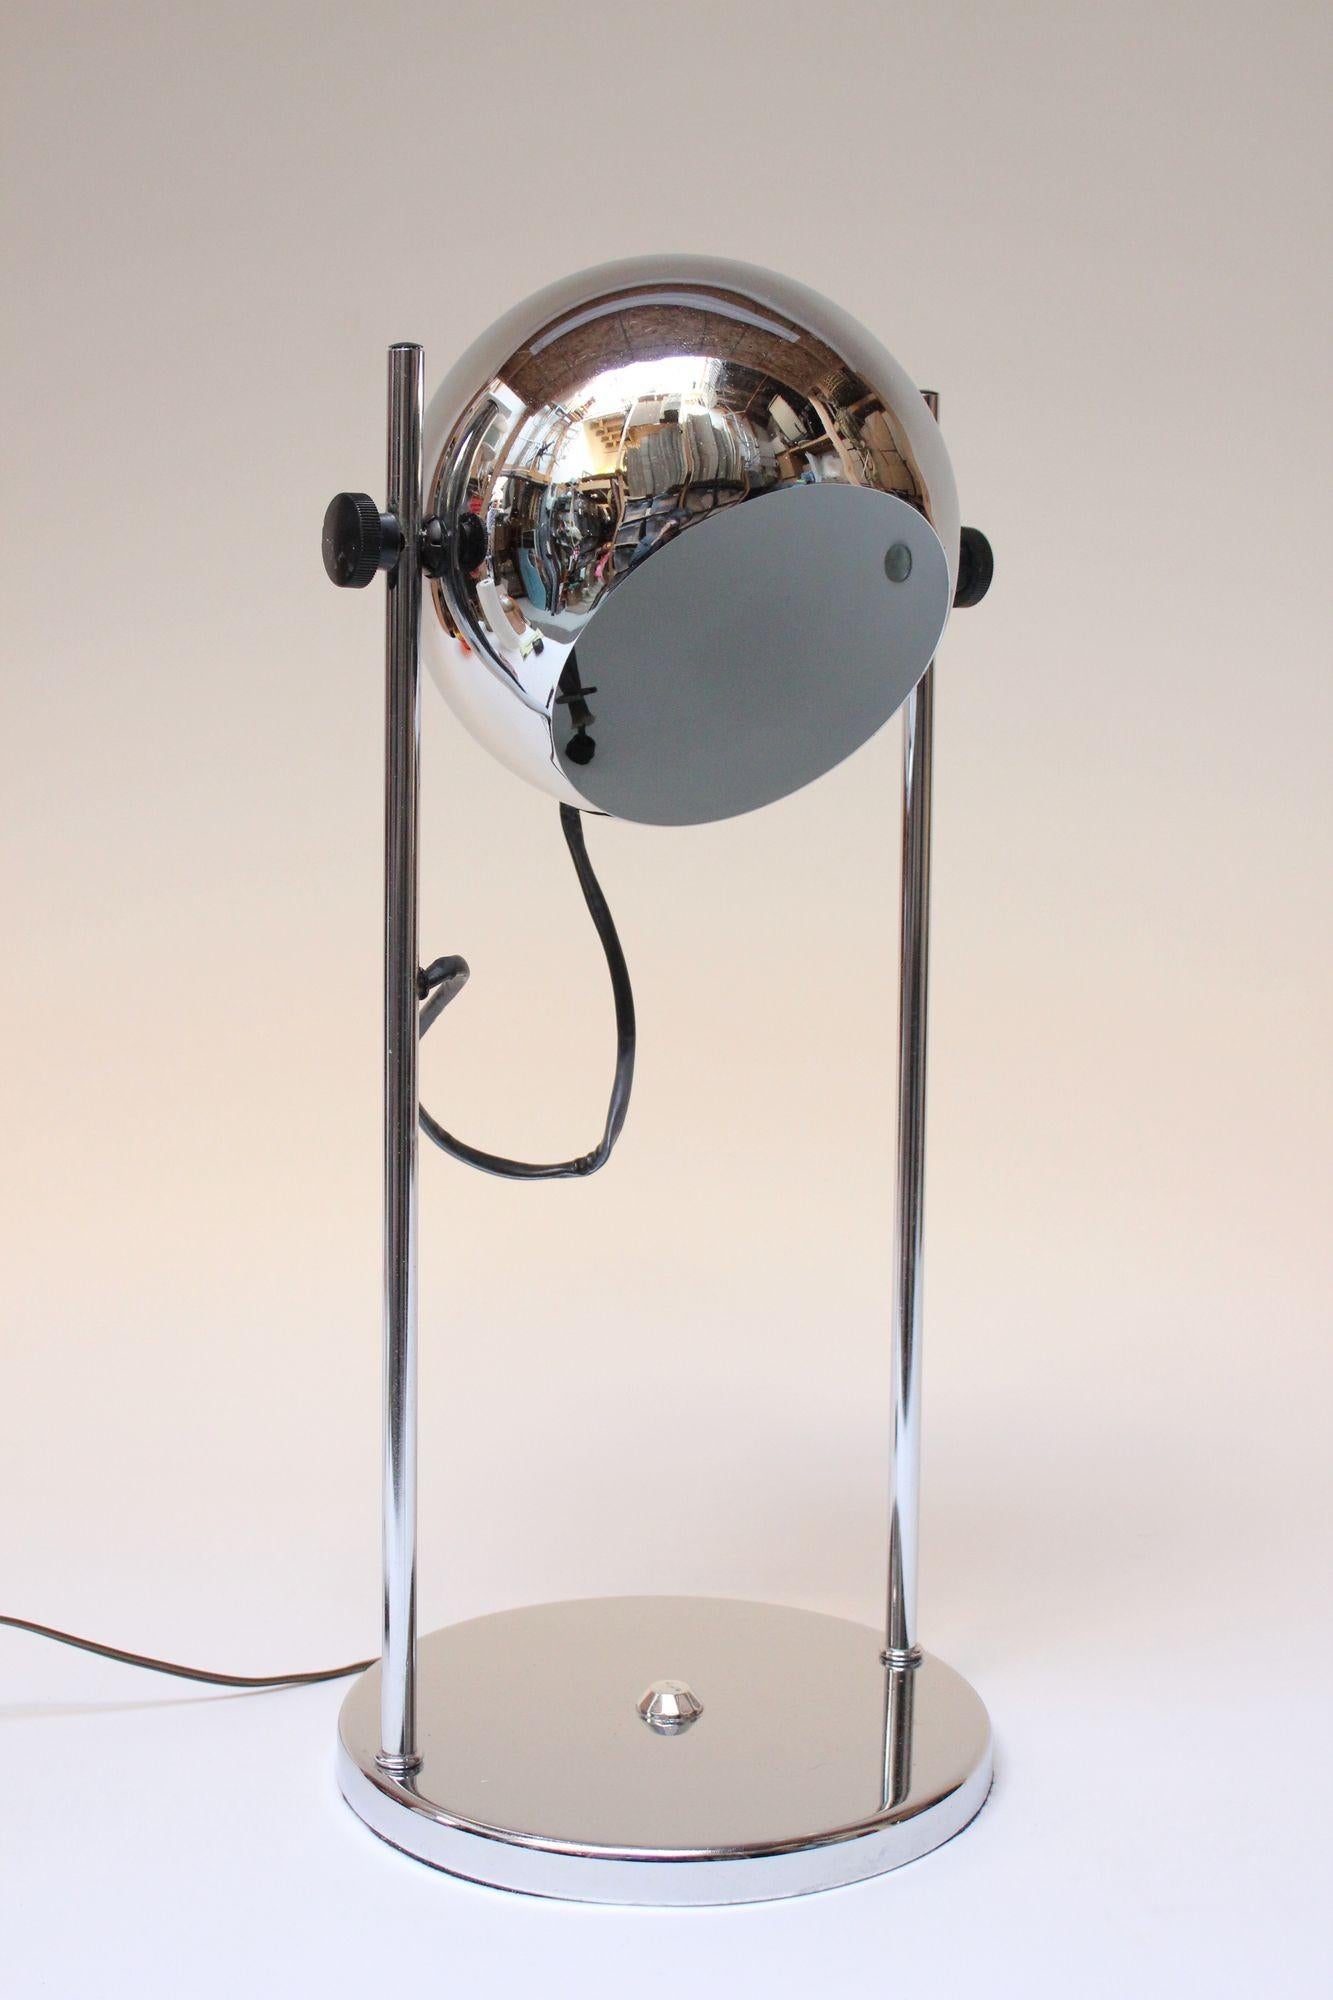 Chrome eyeball fixture supported by tubular chrome posts affixed to a round base in the style of Robert Sonneman (ca. 1970s, USA). Fixture pivots in an upward and downward motion (height is fixed, and shade cannot move up and down the pillars, as